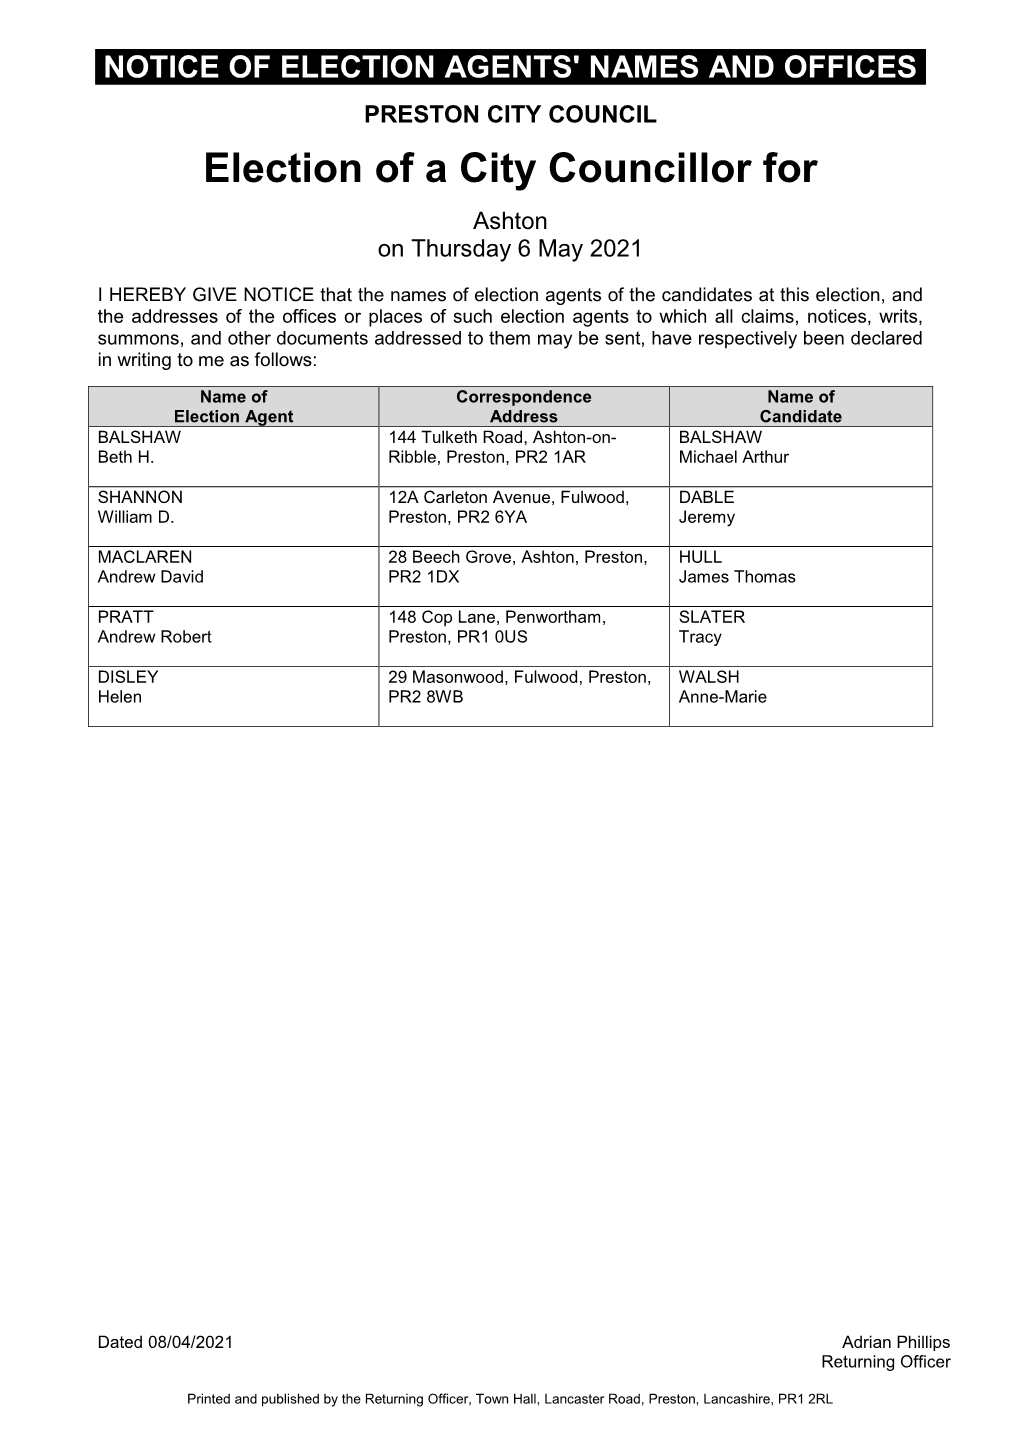 Notice of Election Agents' Names and Offices